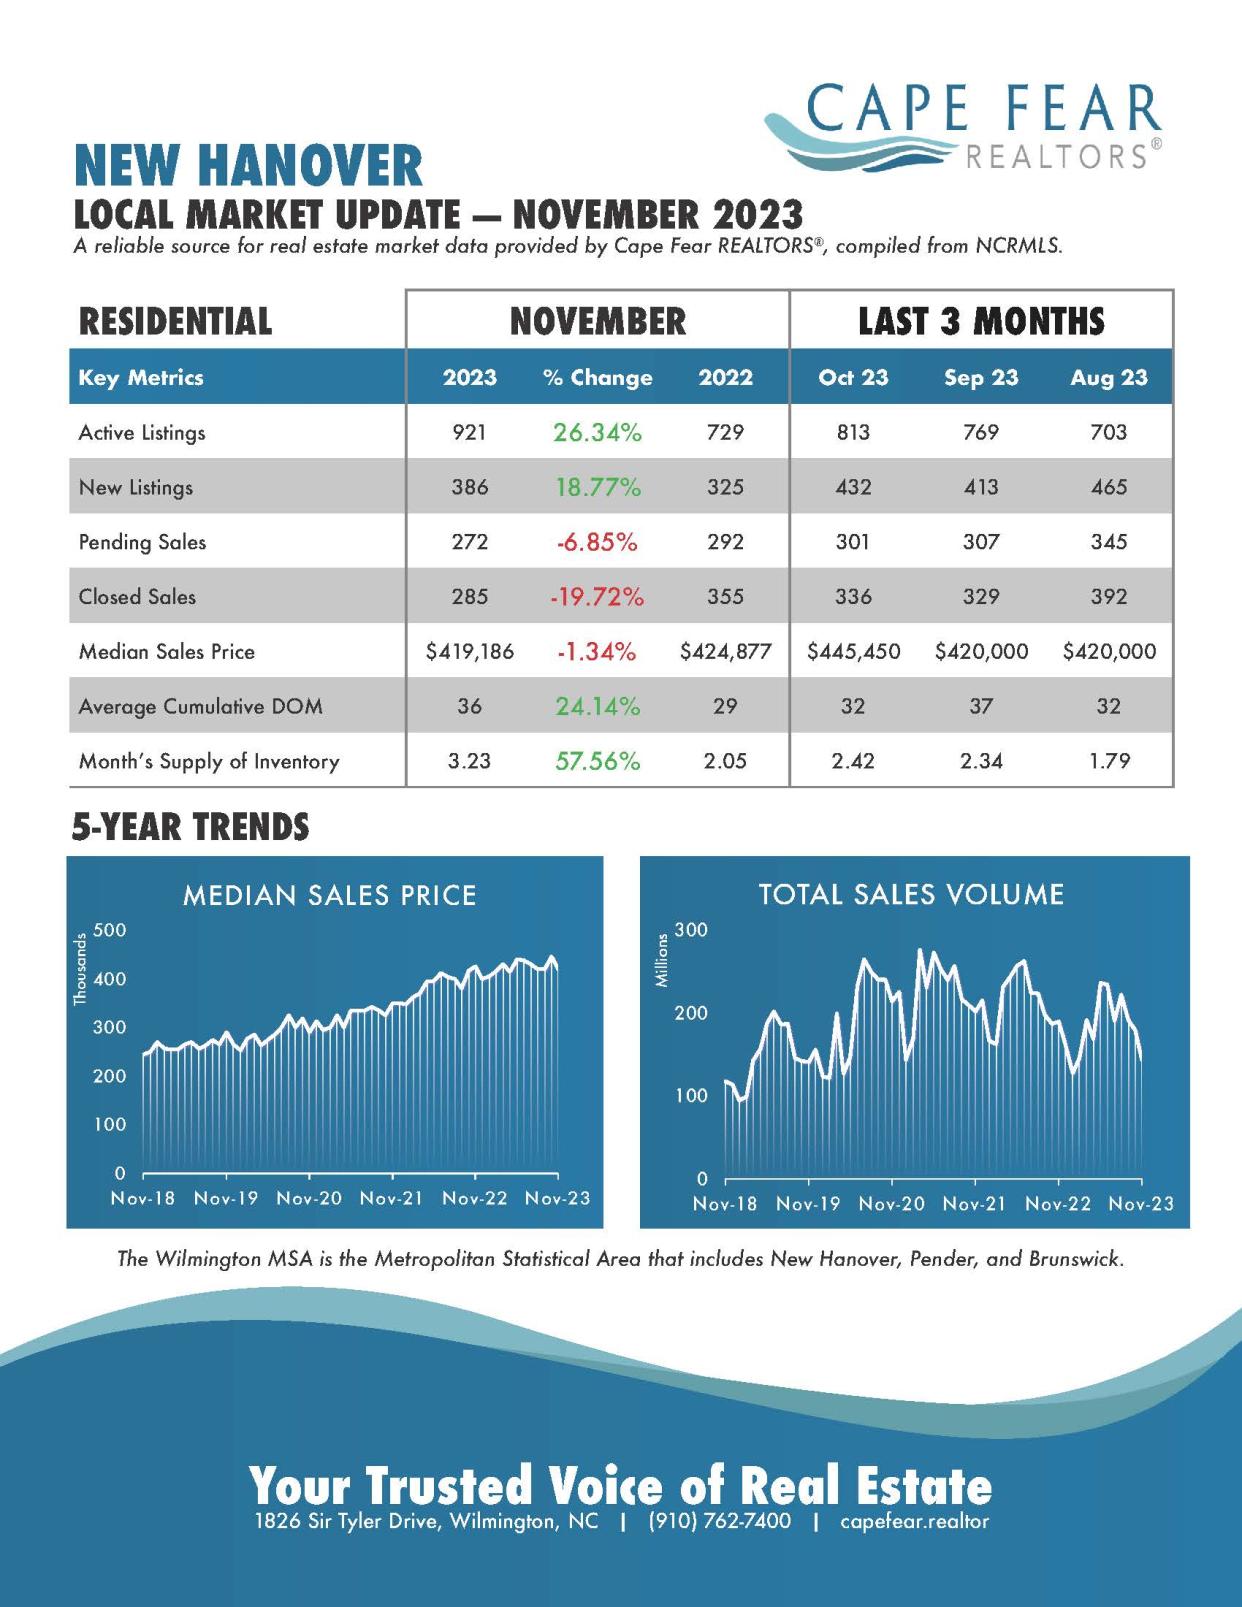 Local real estate market update from the Cape Fear Realtors.